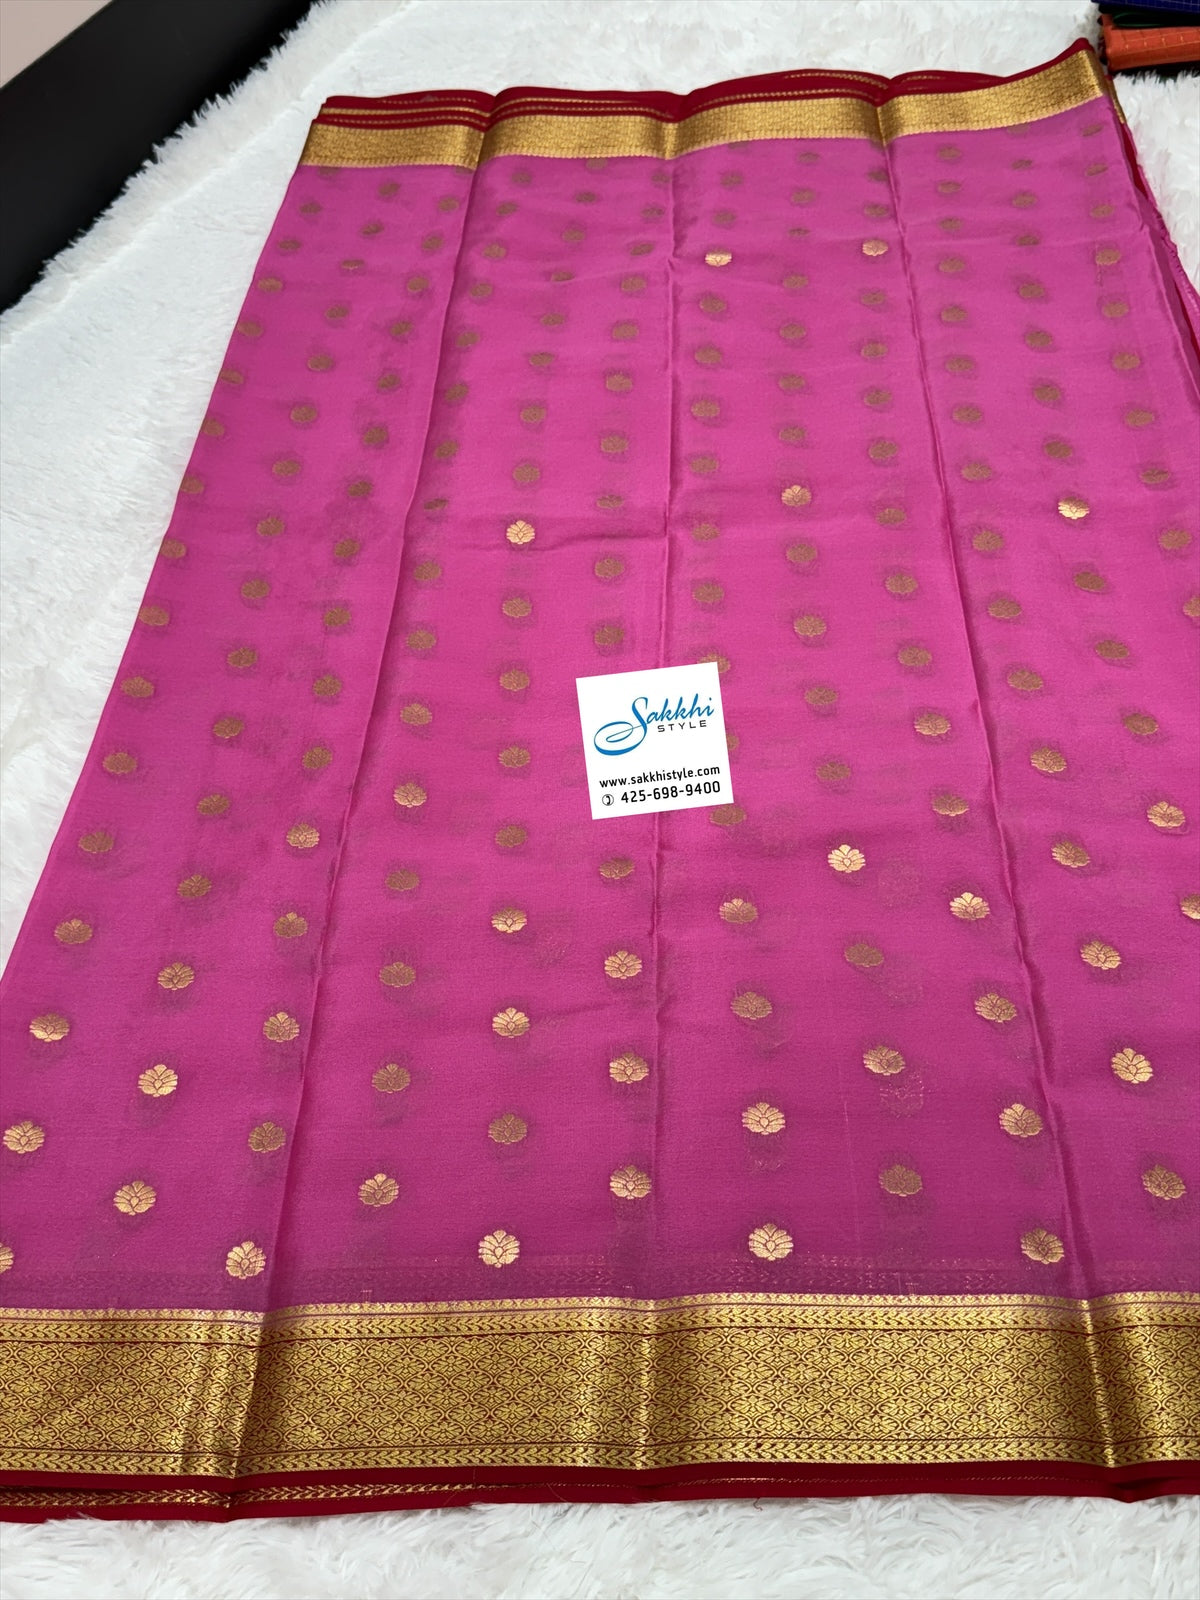 PURE MYSORE SILK SAREE IN BLEND OF LIGHT PINK AND MAROON HUES